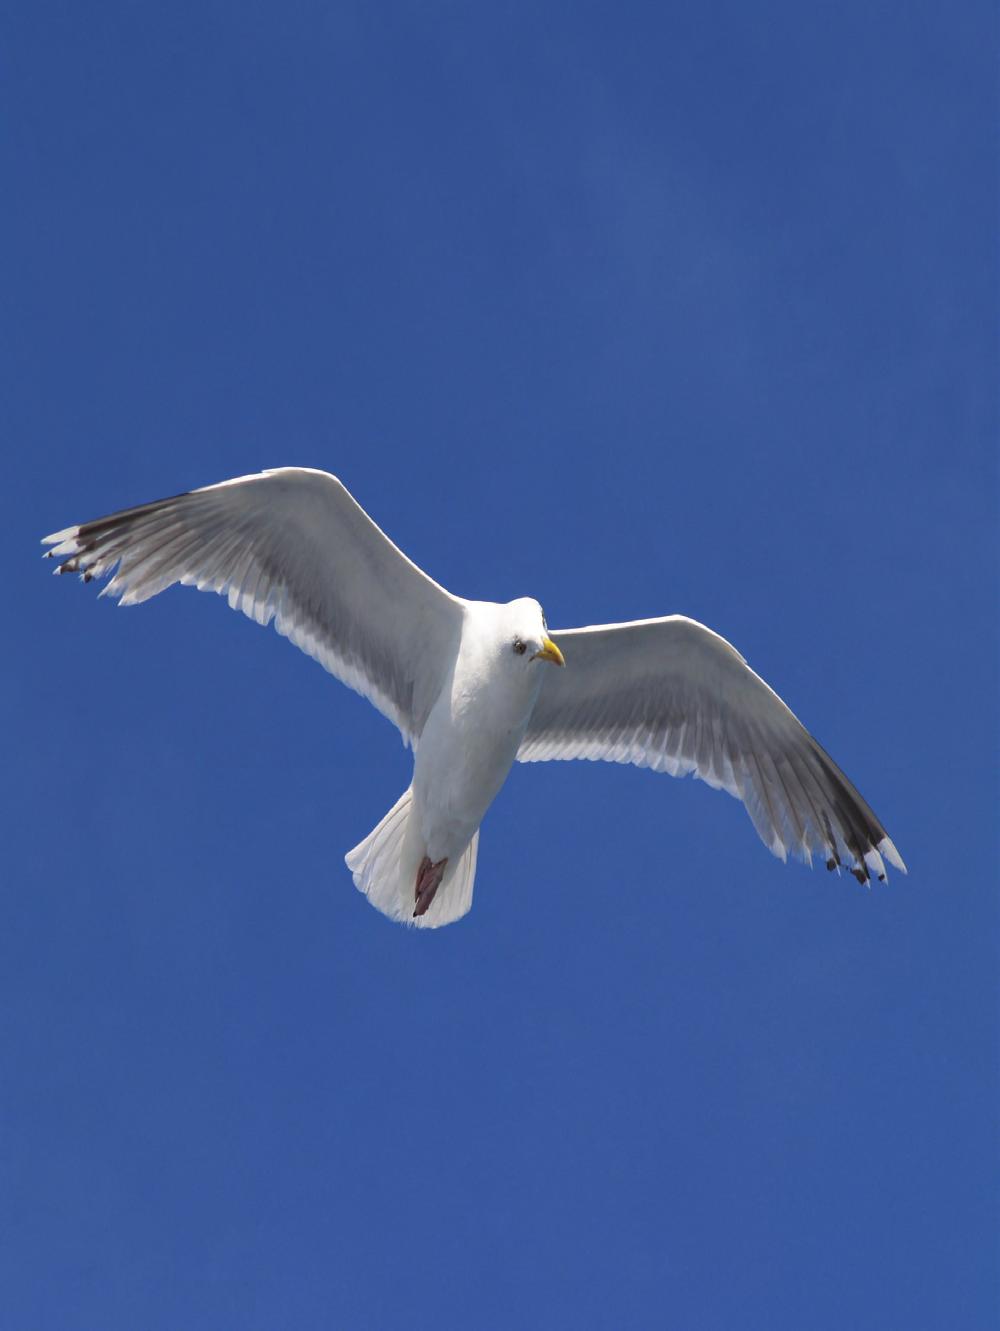 Img. 4 A seagull in flight (Photo courtesy of